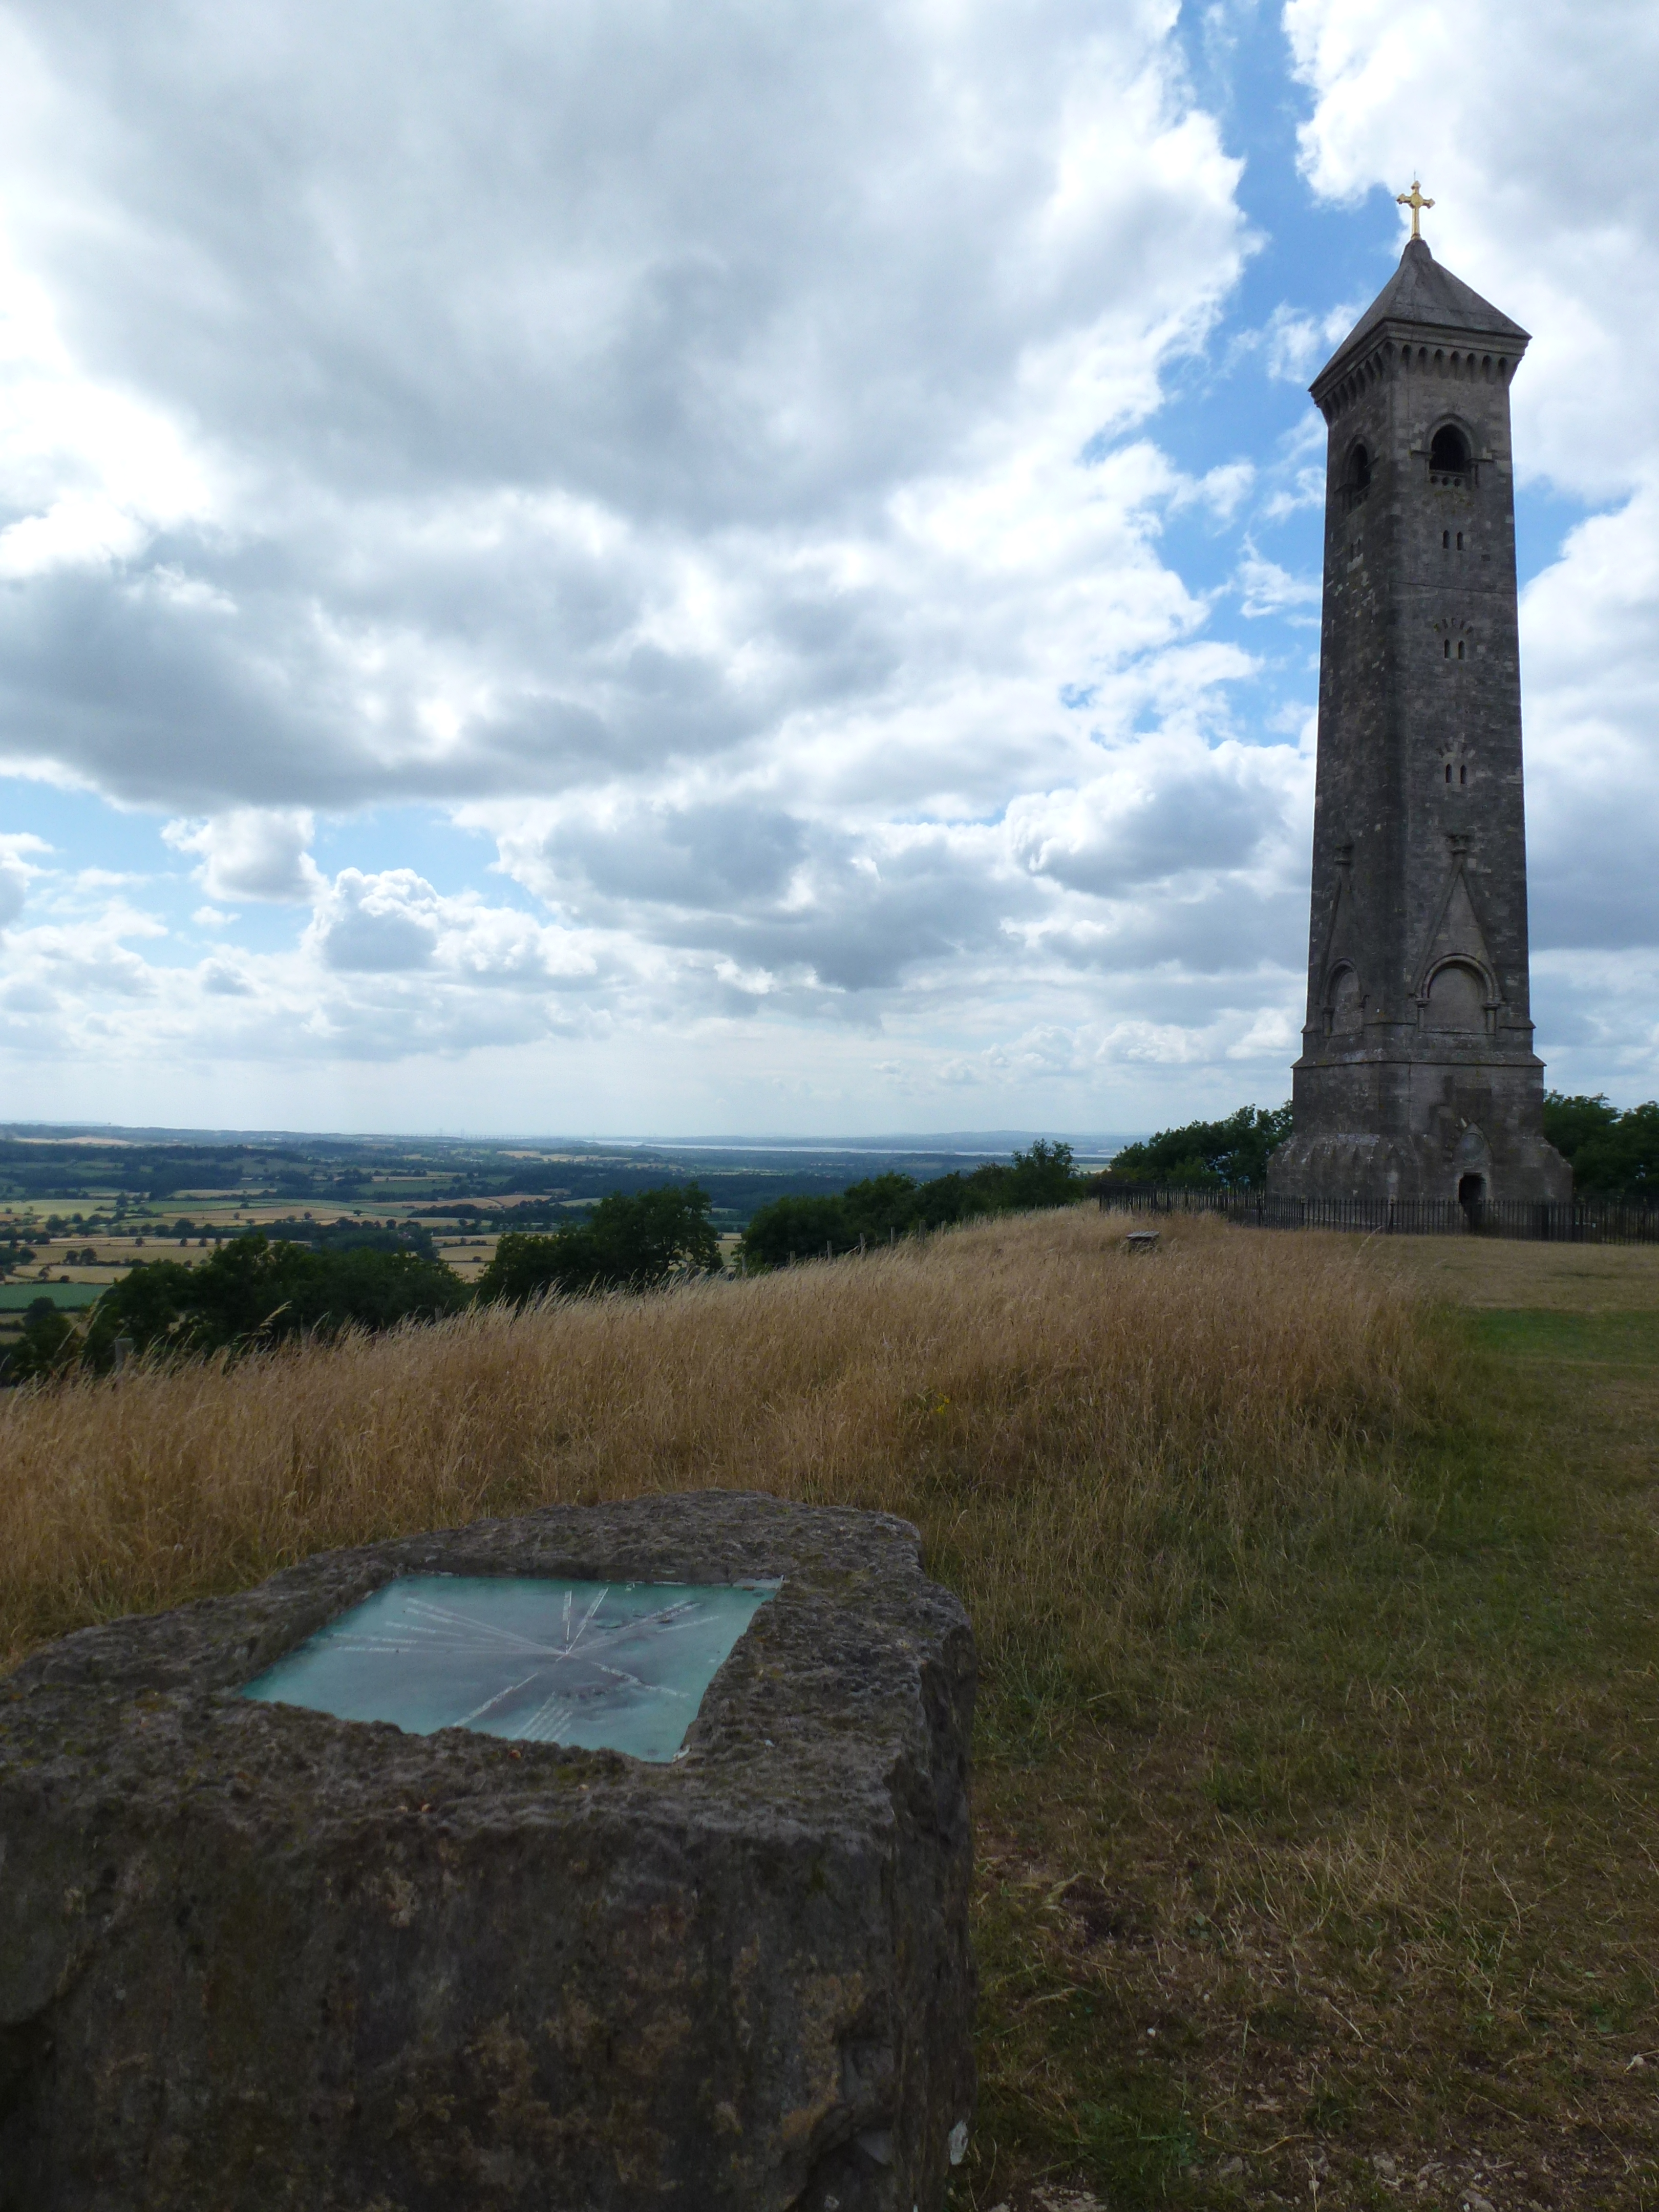 The Cotswold Way Monument on the approach to Wotton-under-Edge